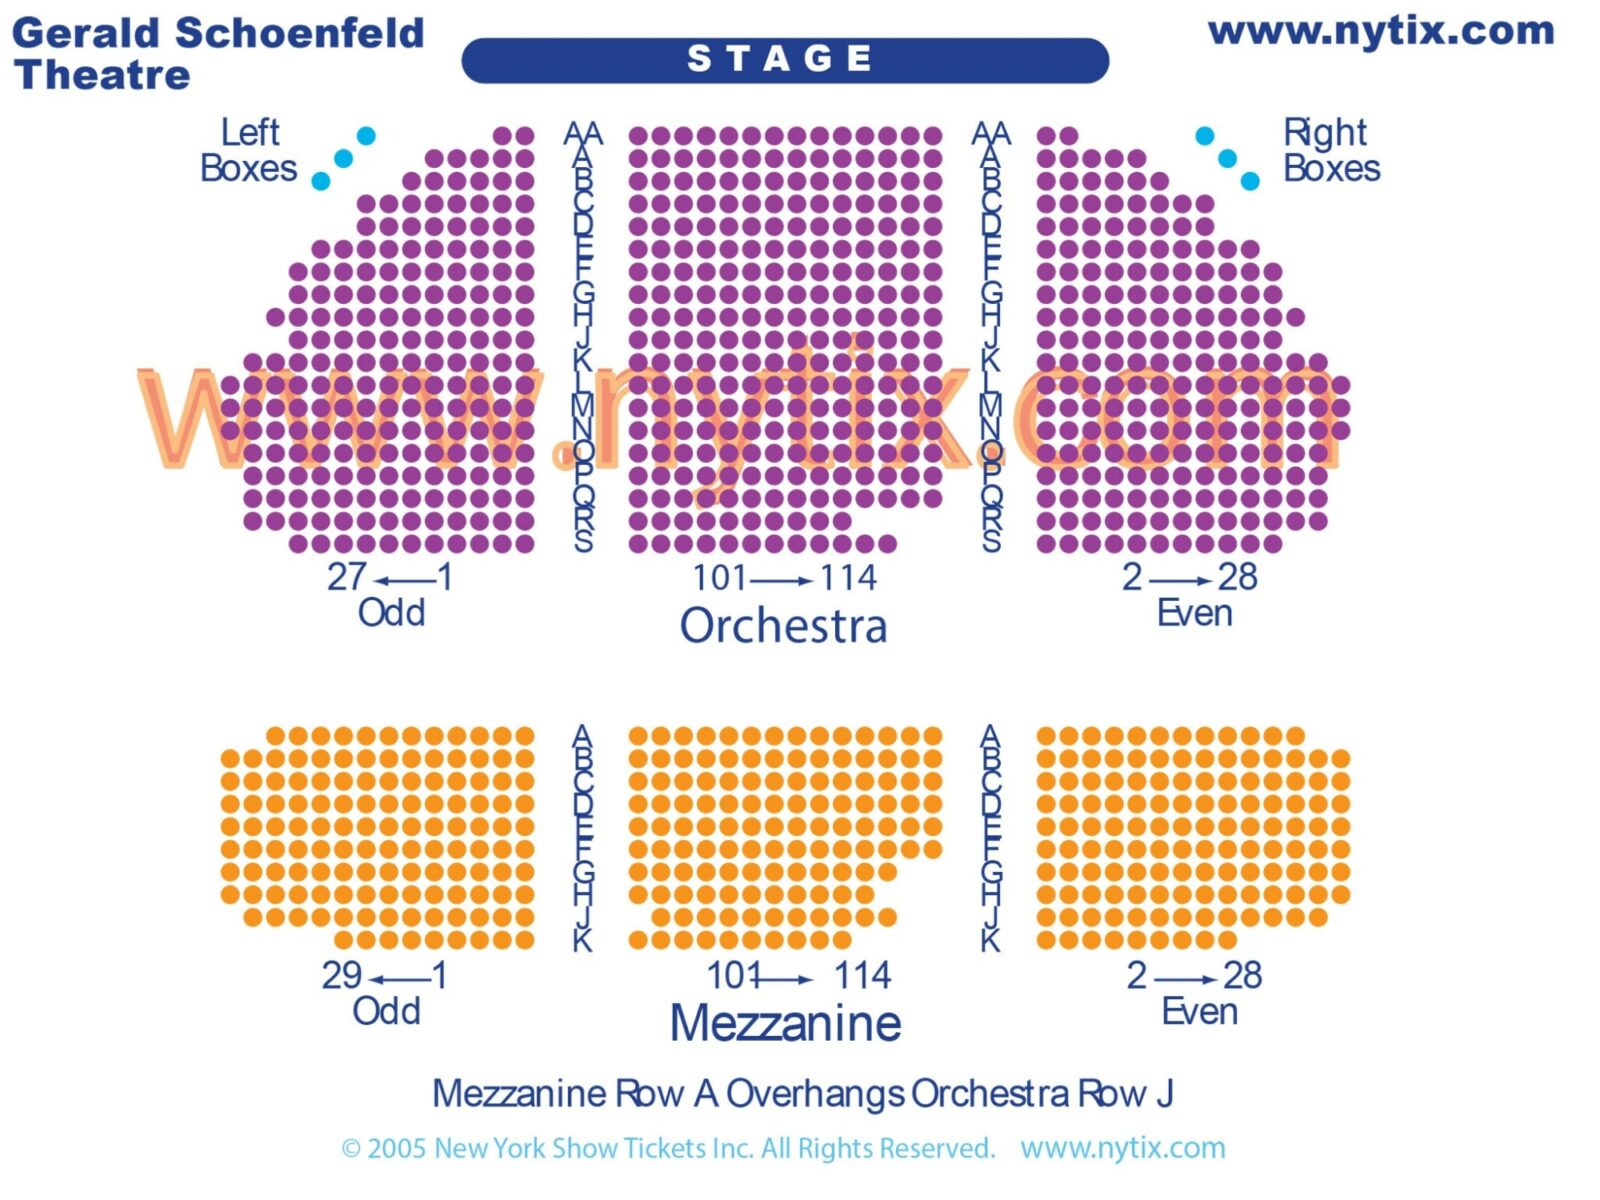 Come From Away Theater Seating Chart